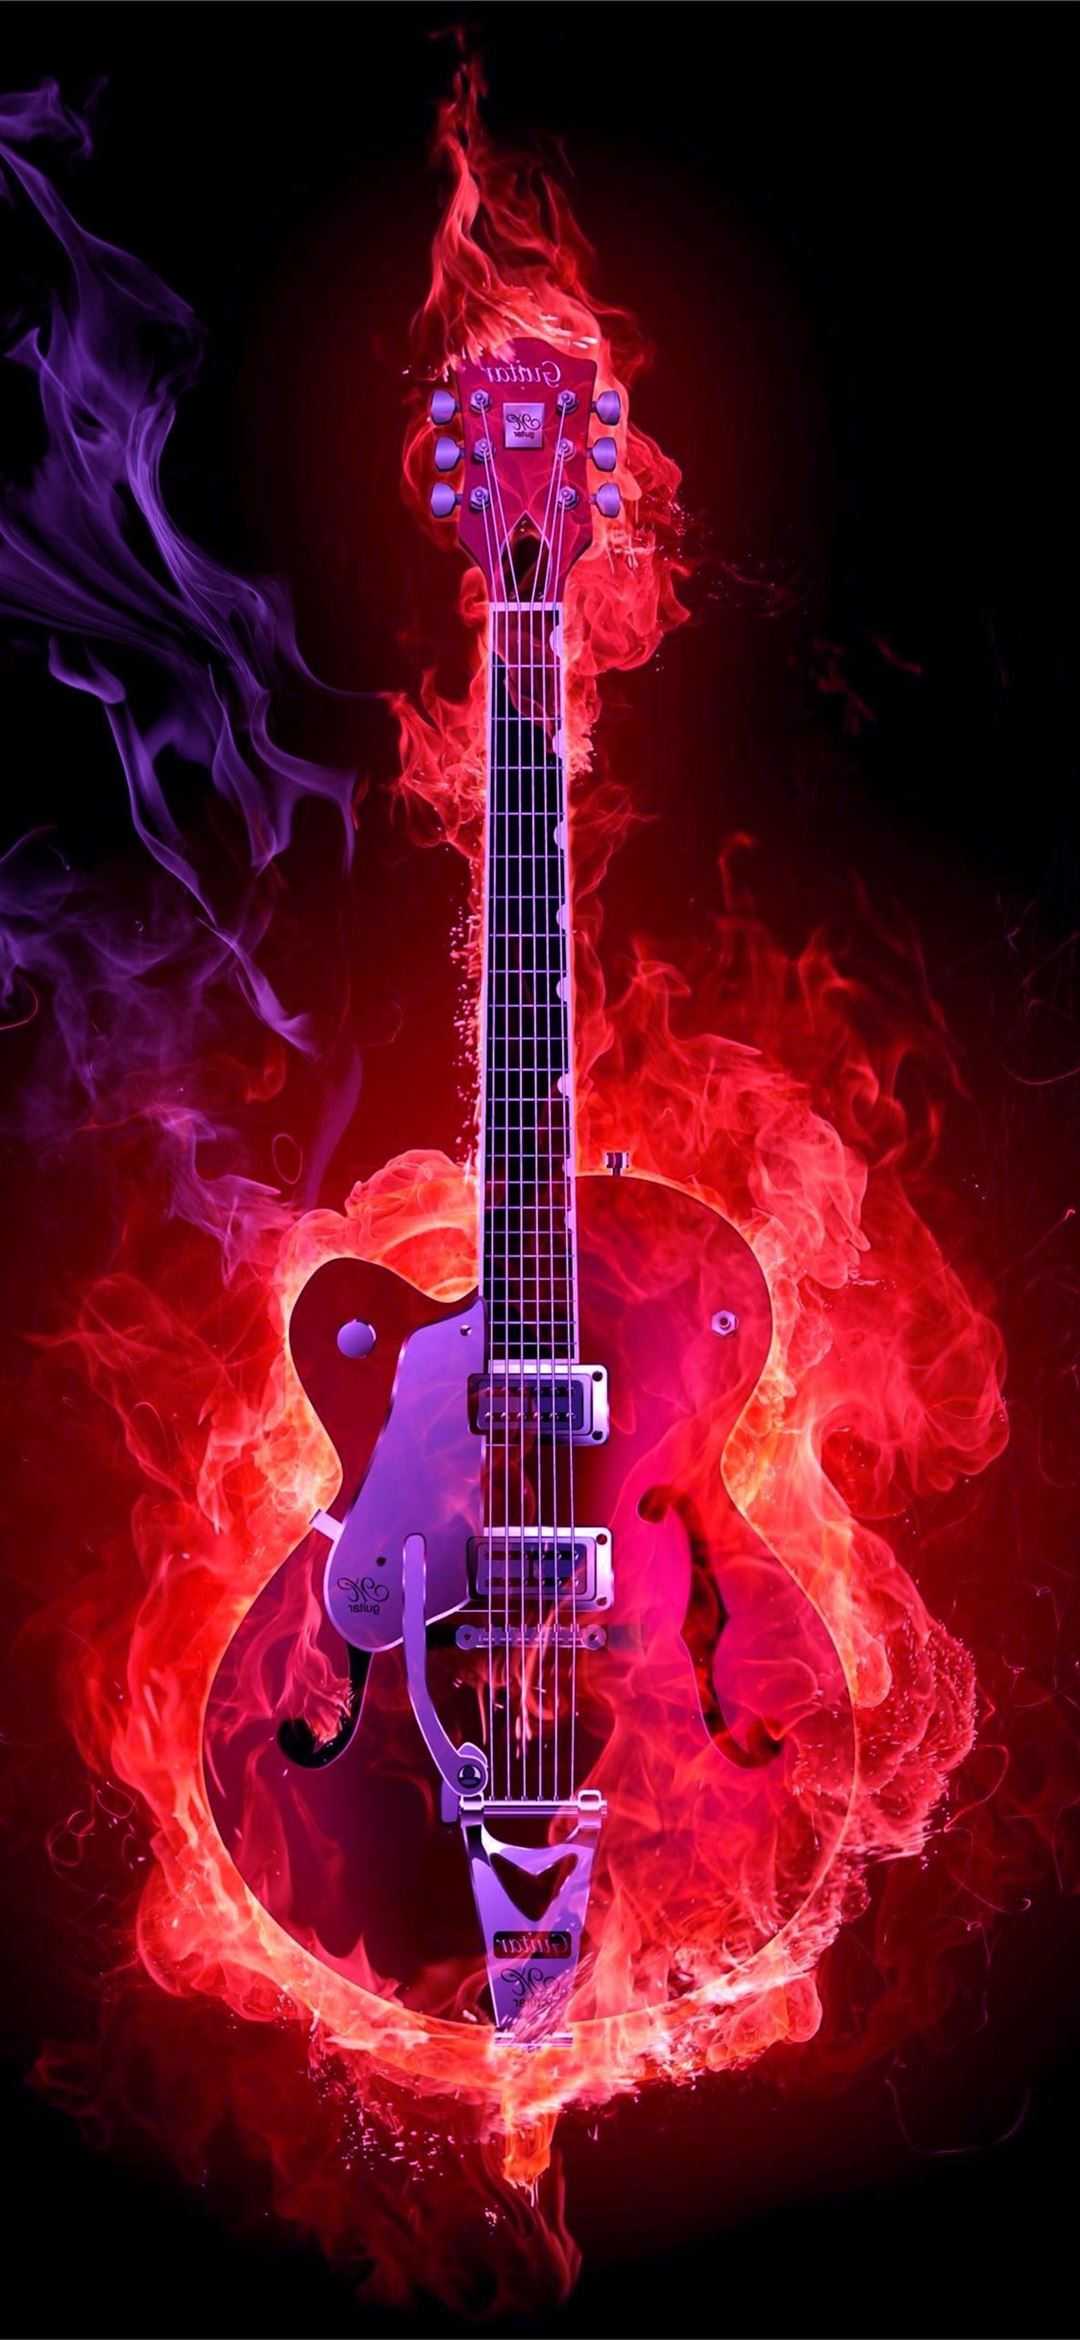 IPhone Wallpaper Fire Guitar with high-resolution 1080x1920 pixel. You can use this wallpaper for your iPhone 5, 6, 7, 8, X, XS, XR backgrounds, Mobile Screensaver, or iPad Lock Screen - Guitar